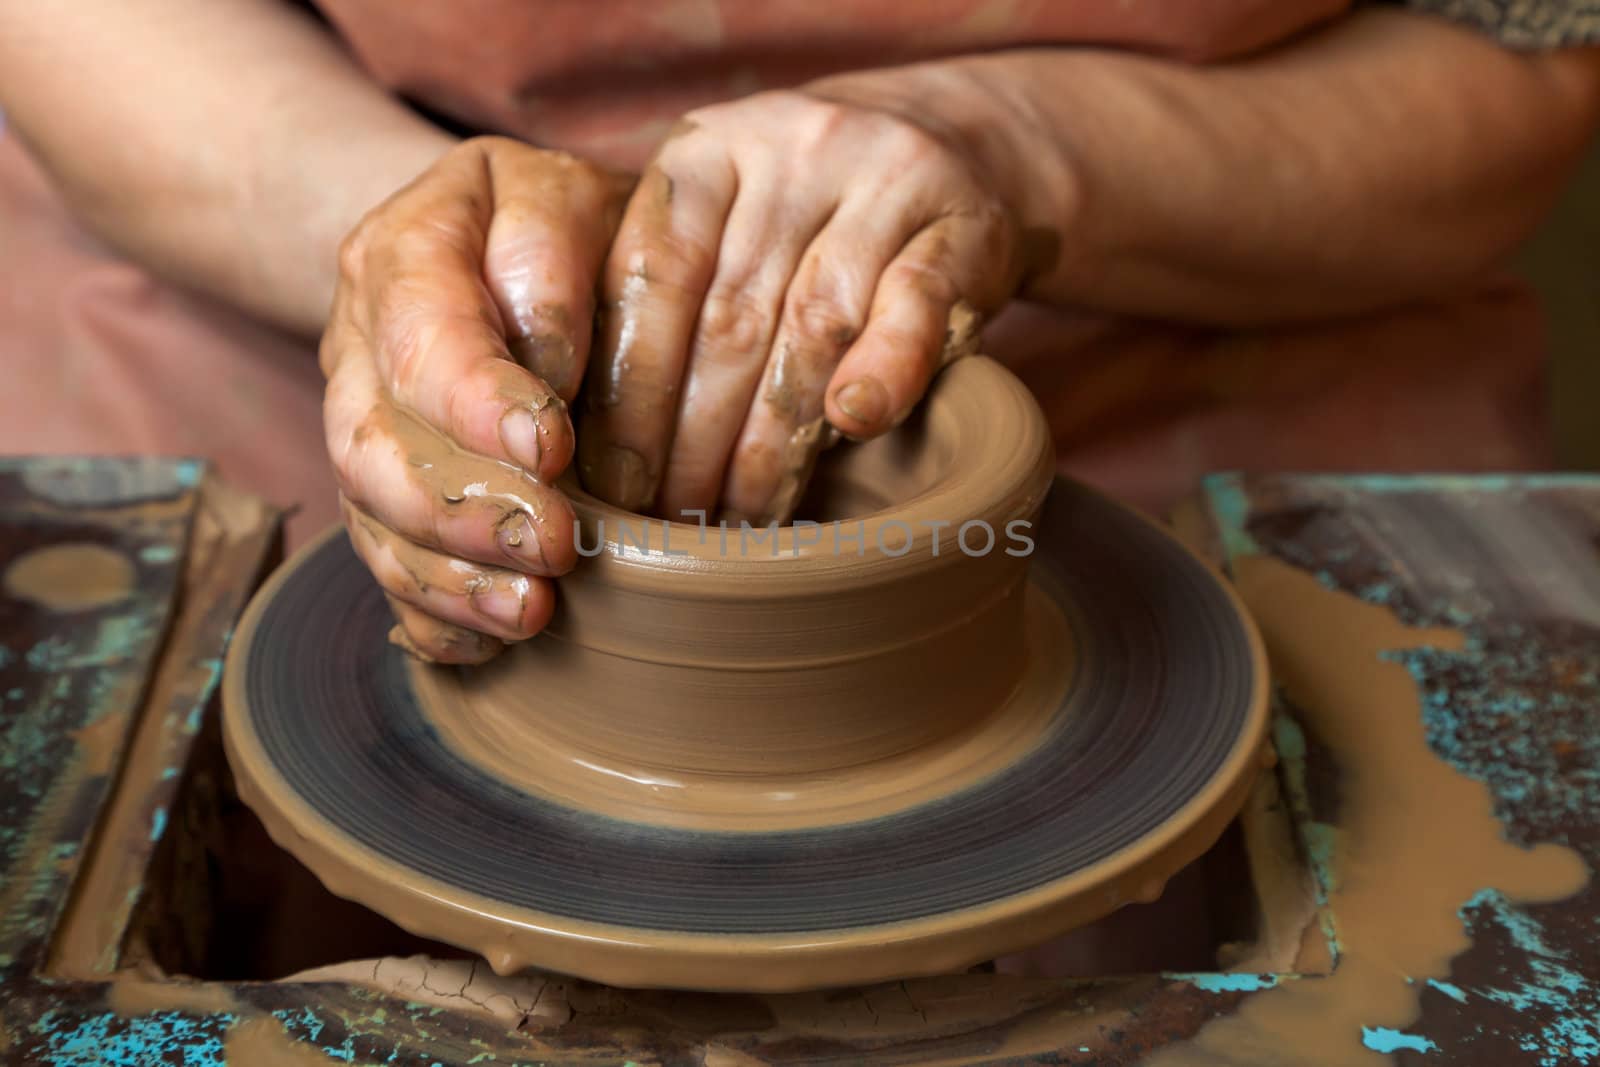 Potter creates a pitcher on a pottery wheel by Antartis